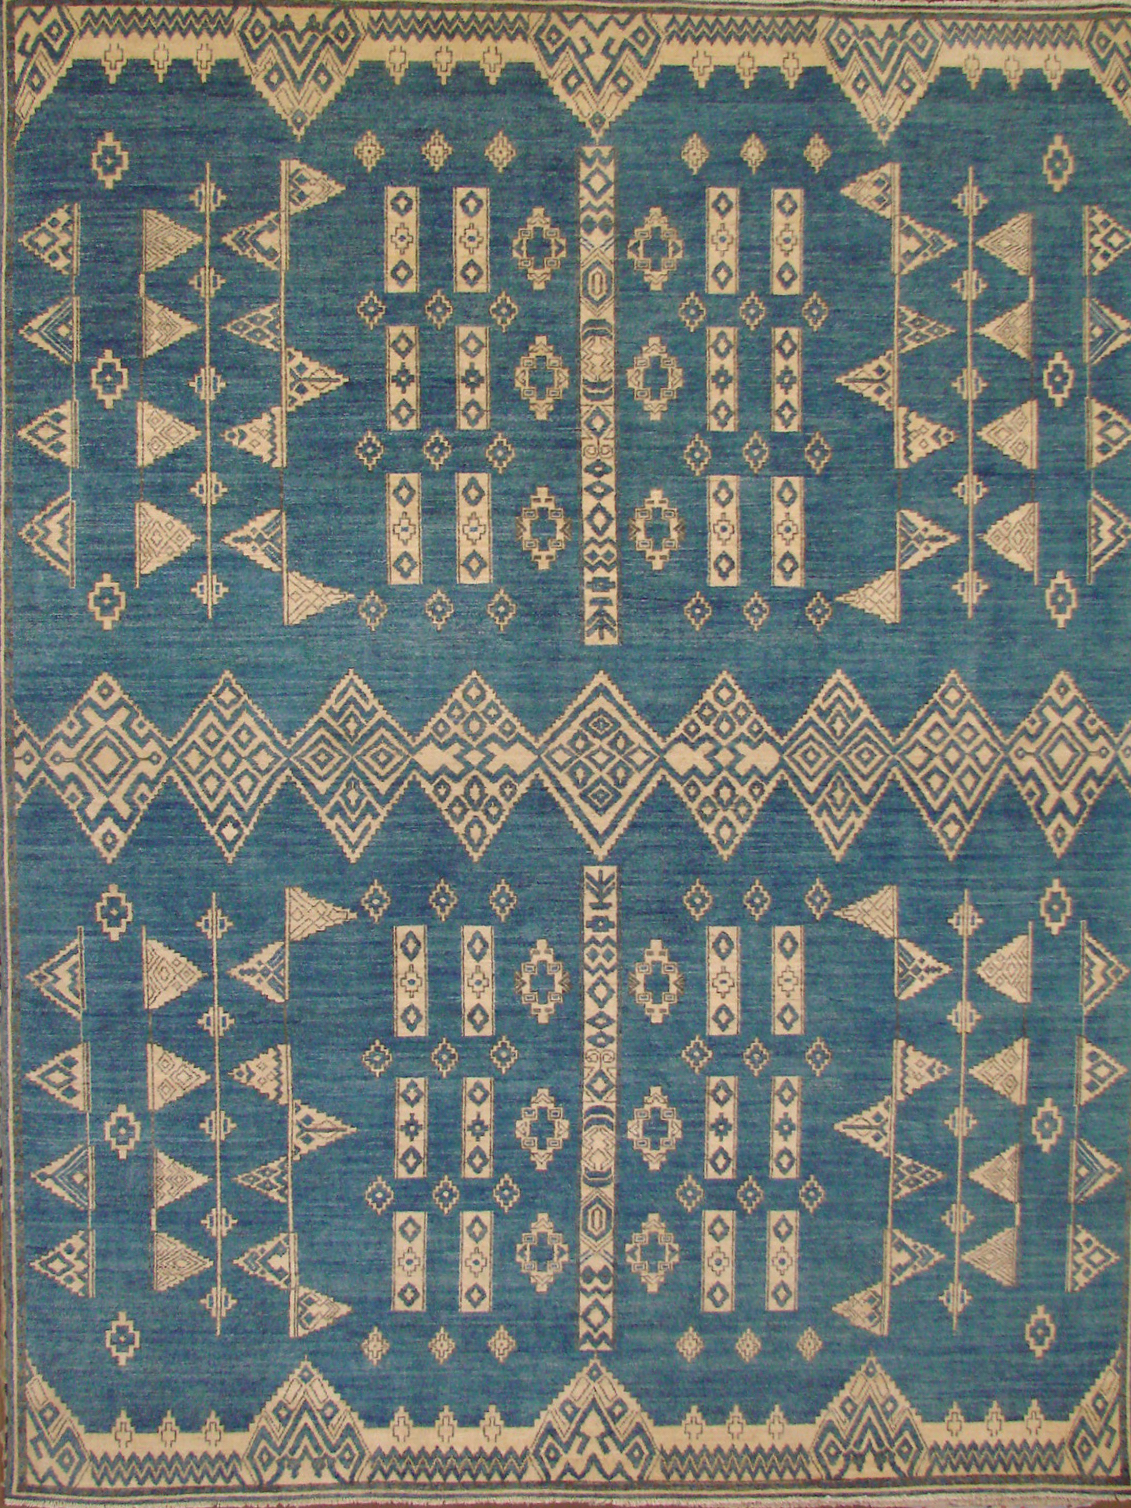 Persian & Tribal Rugs TUARGE 021499 Medium Blue - Navy & Ivory - Beige Hand Knotted Rug